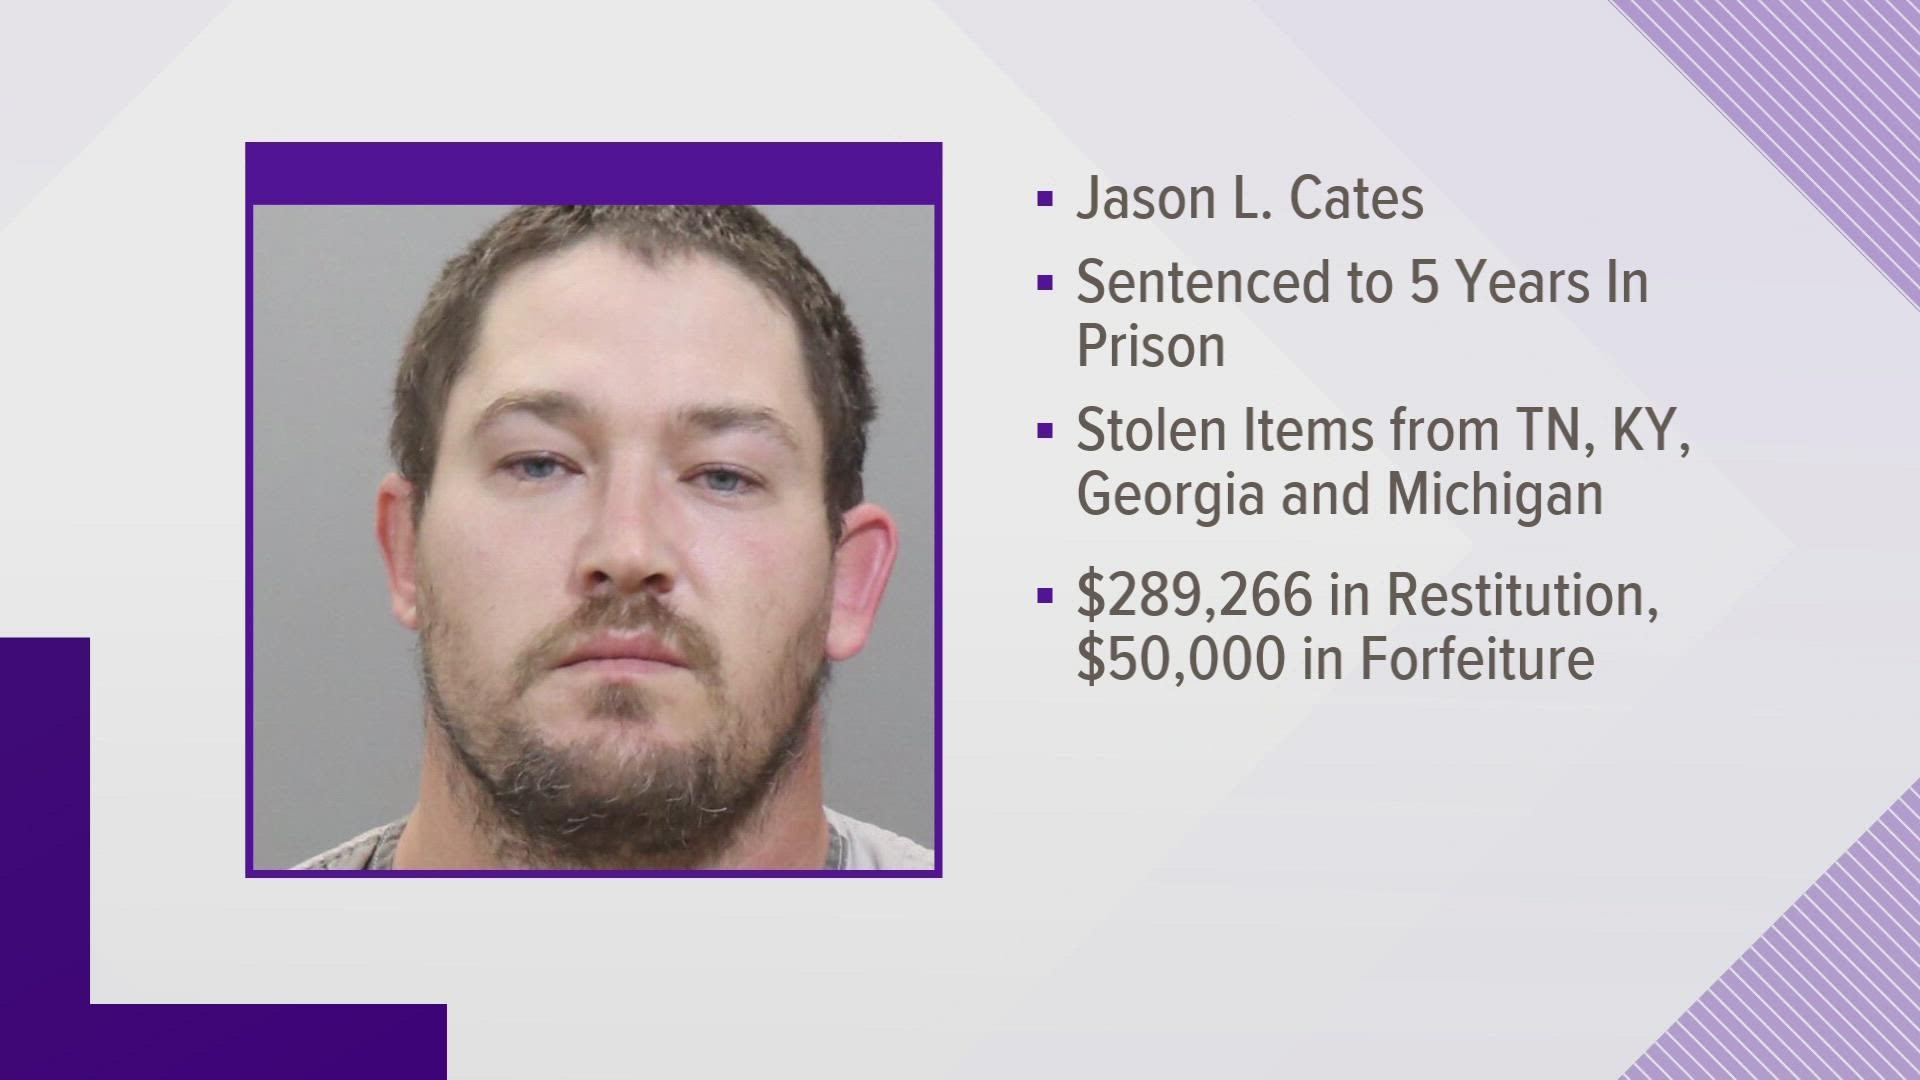 Jason Cates burglarized multiple sports card businesses in multiple states, according to the Eastern Kentucky District of the U.S. Attorney's Office.